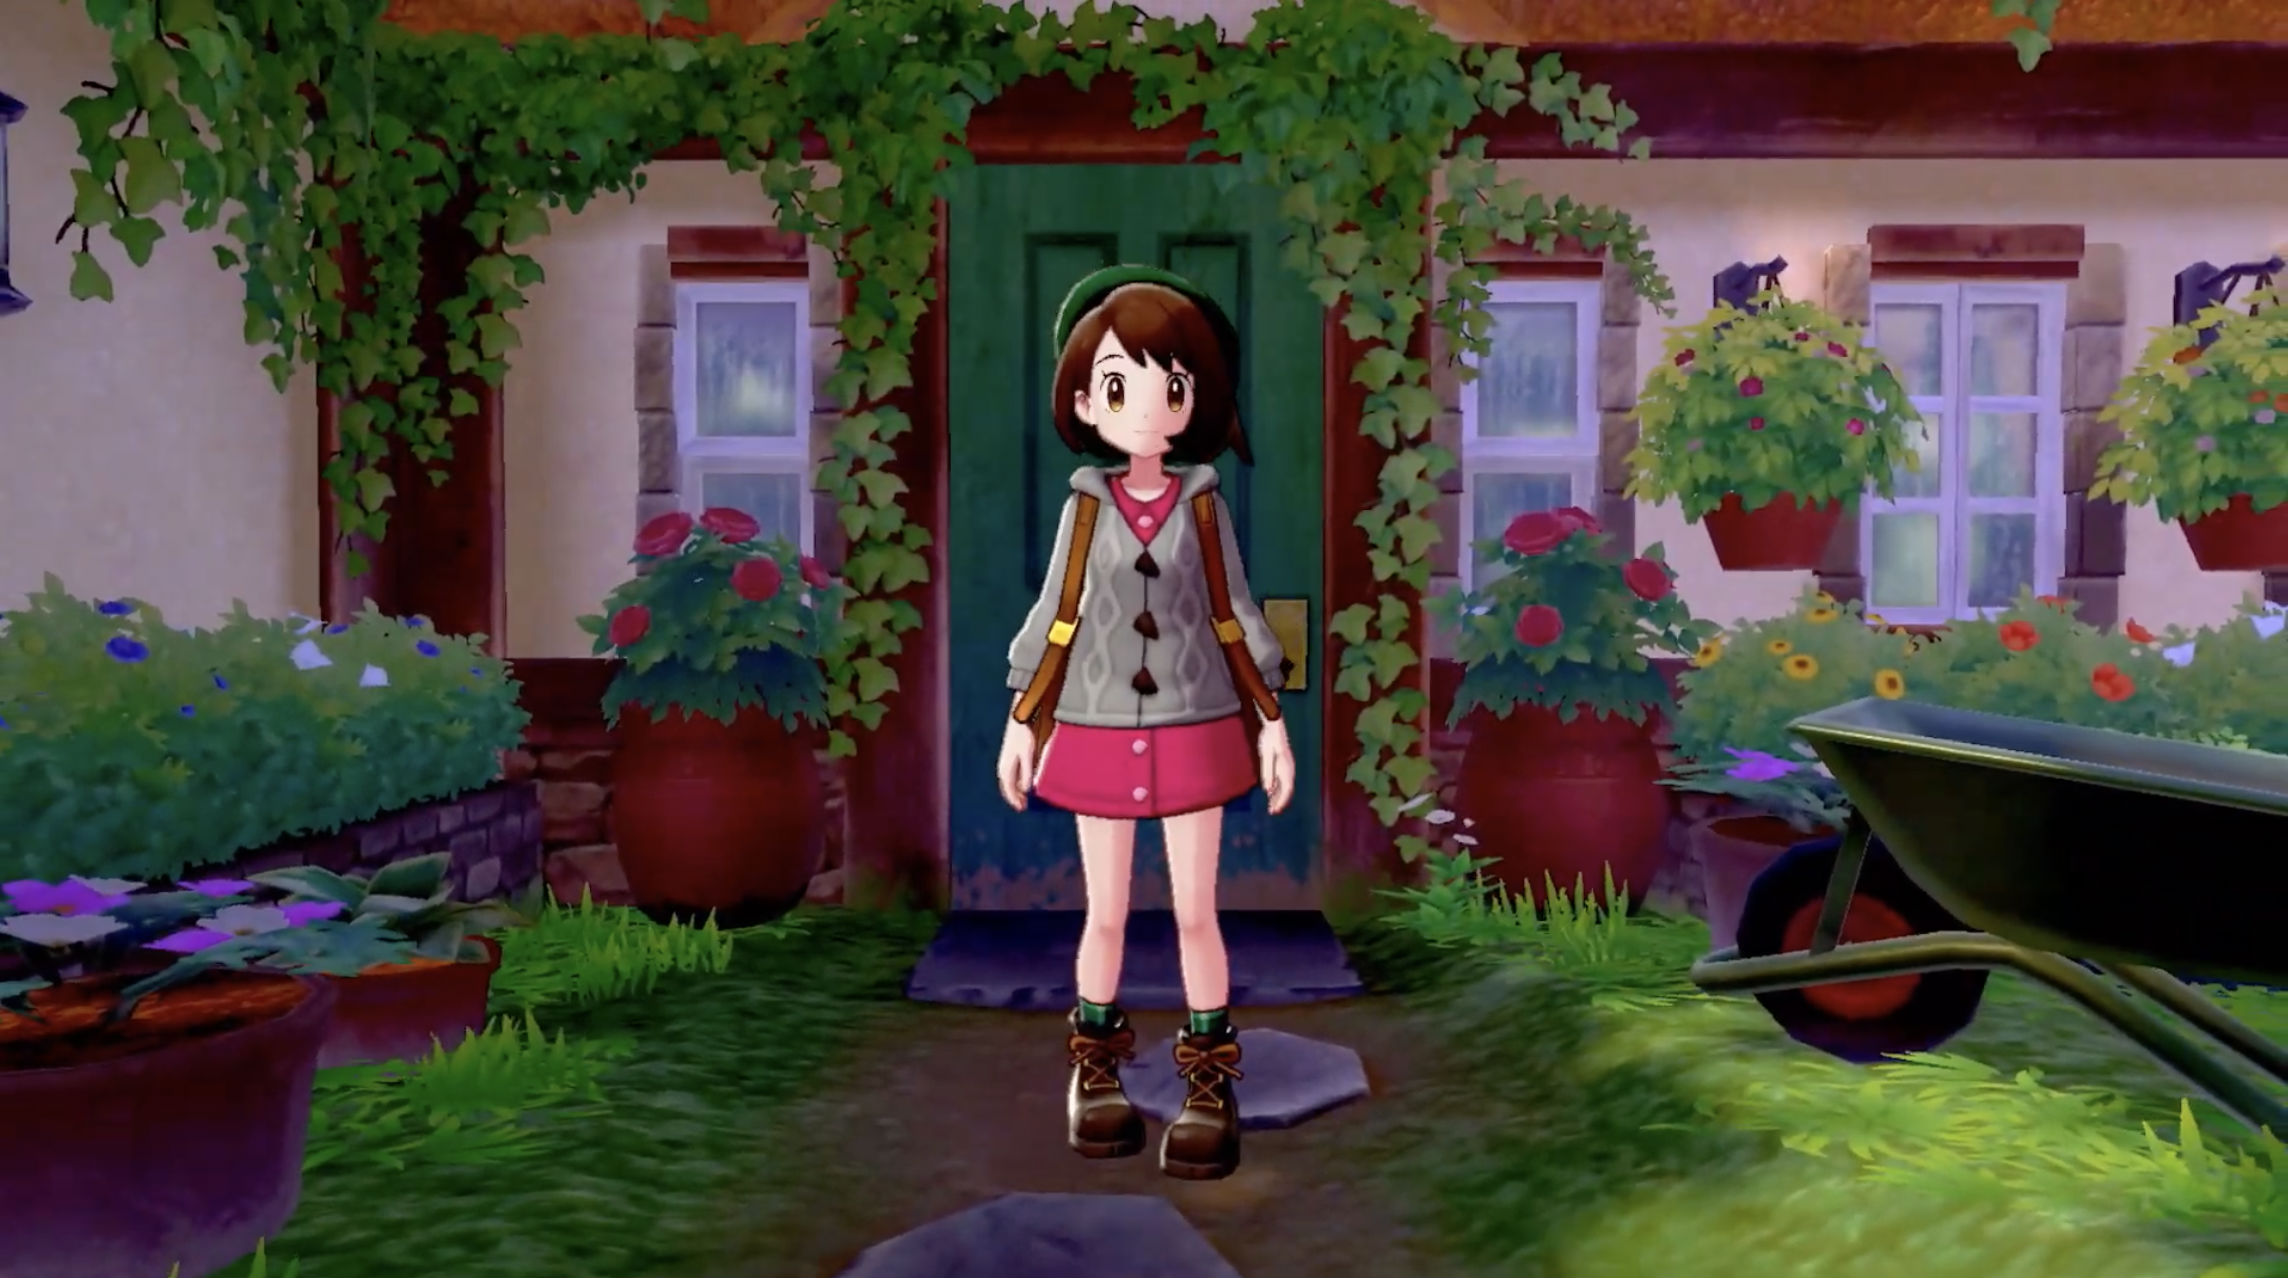 Pokémon Sword And Shield Revealed In Latest Direct!